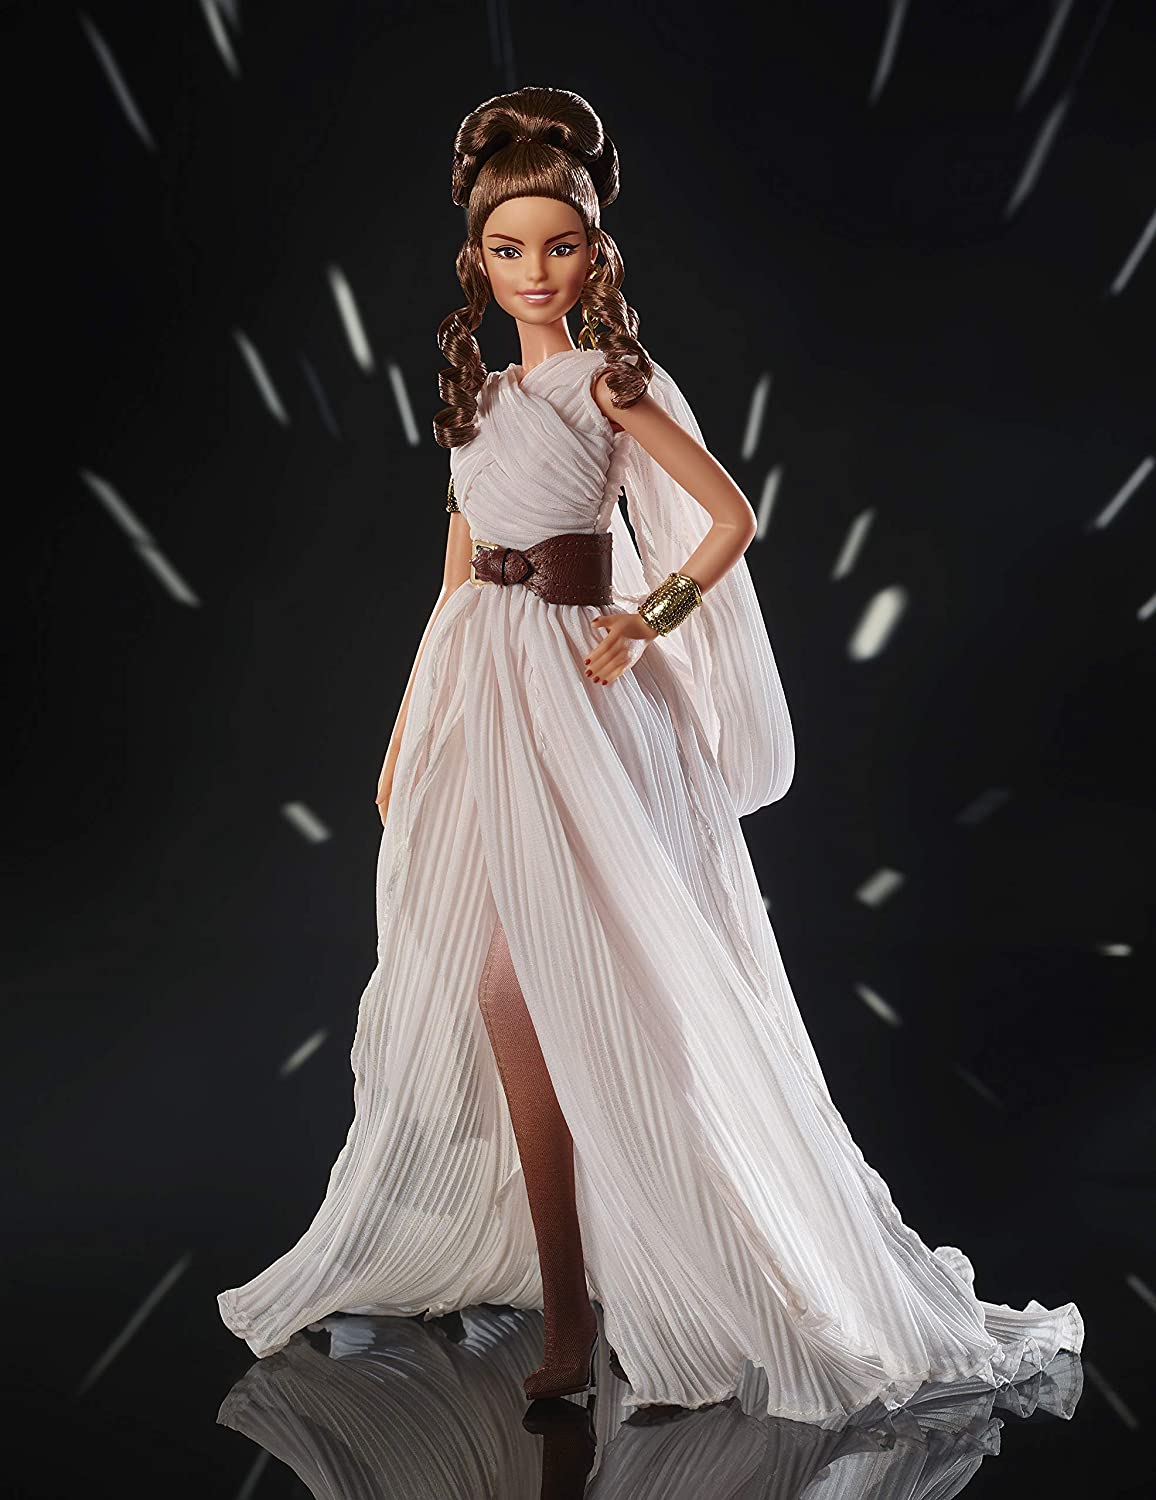 Barbie Star Wars Signature 2020 four collector dolls: Rey, Stormtrooper, C3PO Chewbacca - YouLoveIt.com